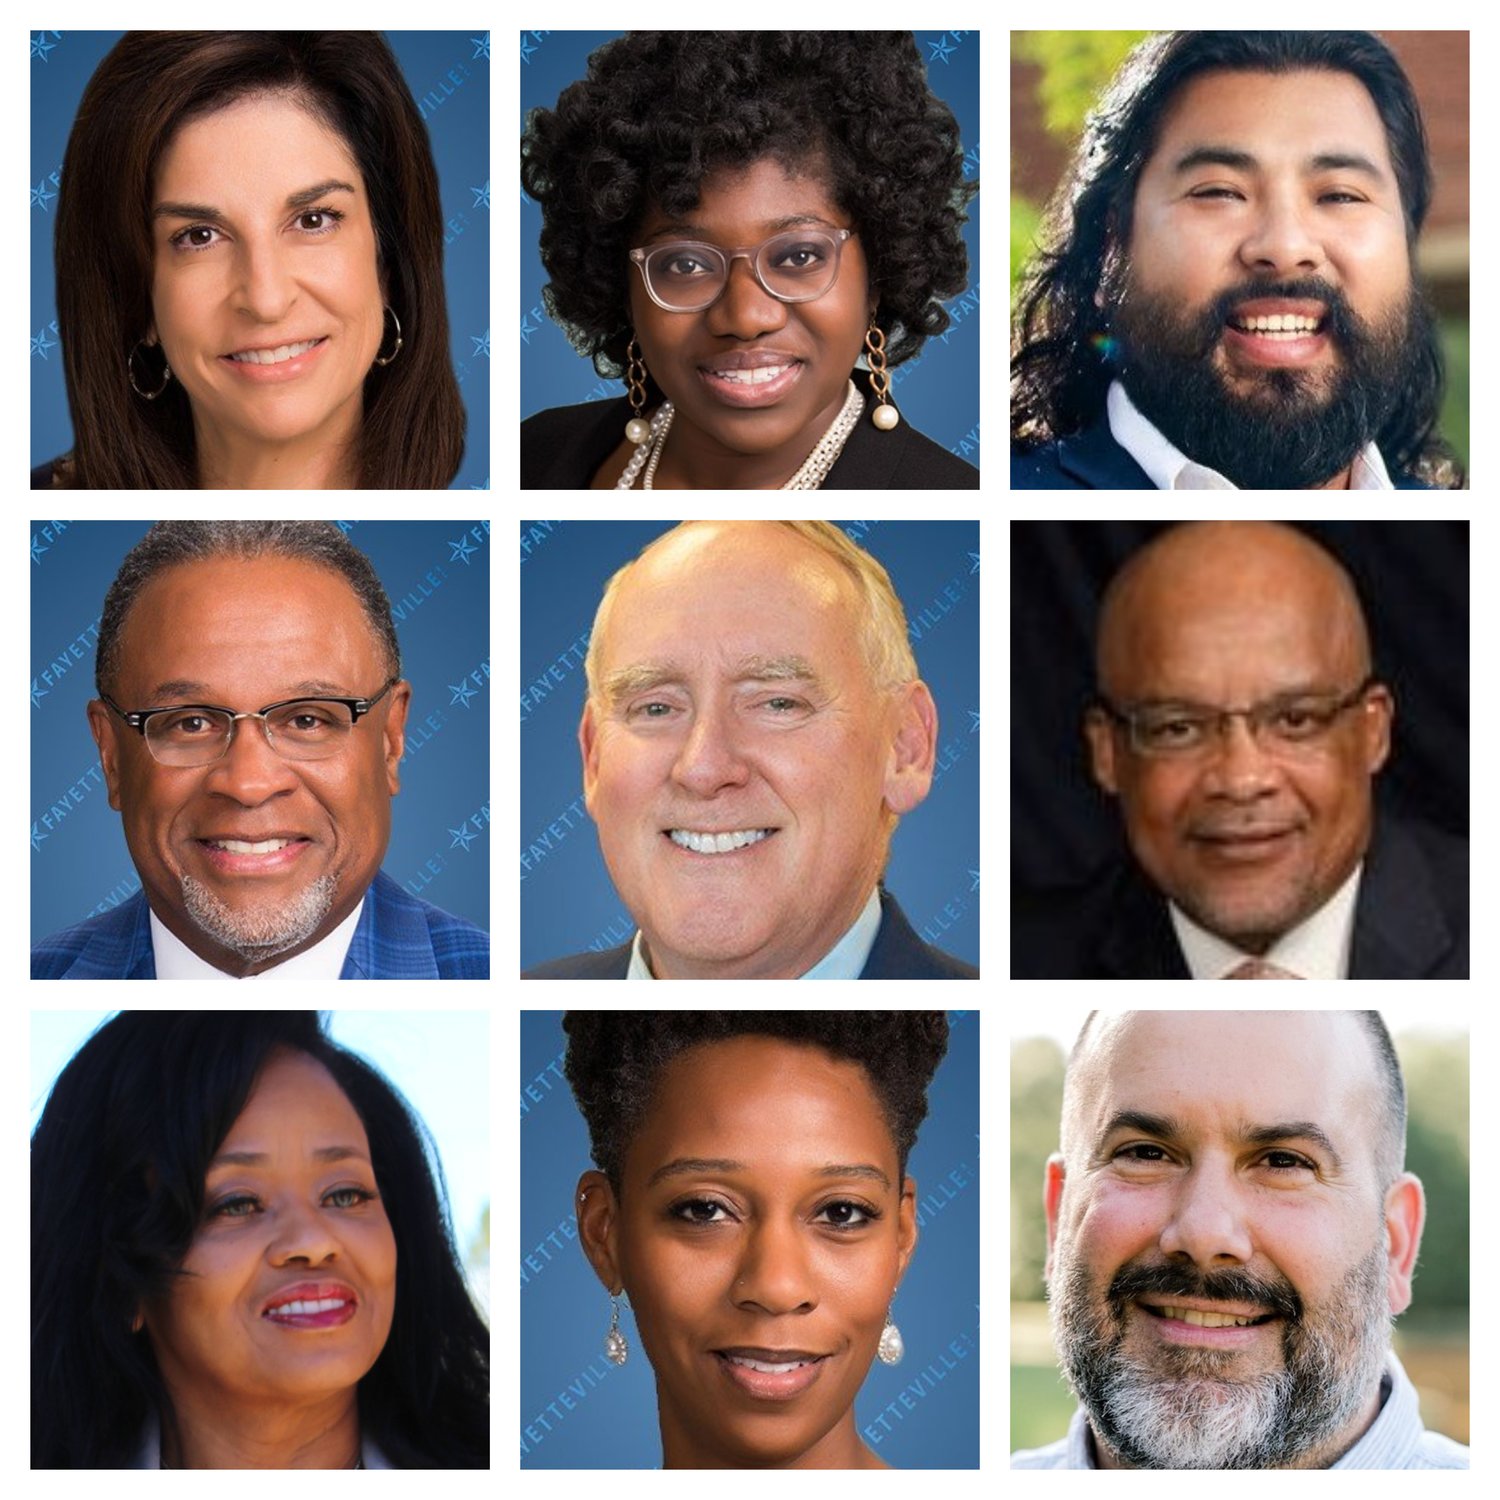 The Fayetteville City Council is debating a plan to change electoral terms from two years to staggered, four-year terms. From top left are Kathy Jensen, Shakeyla Ingram, Mario Benavente, D.J. Haire, Johnny Dawkins, Derrick Thompson, Brenda McNair, Courtney Banks-McLaughlin and Deno Hondros.